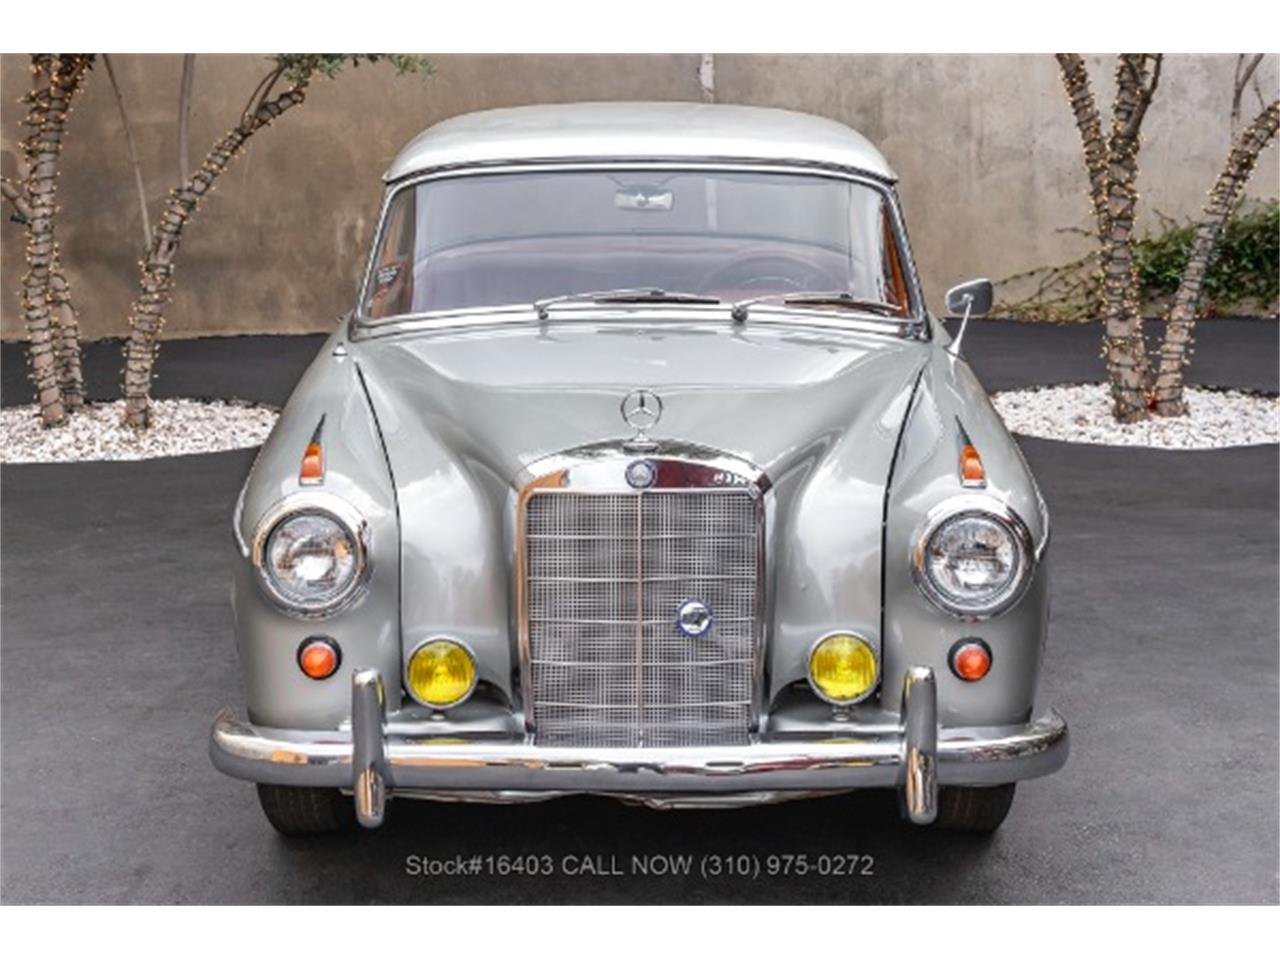 For Sale: 1960 Mercedes-Benz 220S in Beverly Hills, California for sale in Beverly Hills, CA